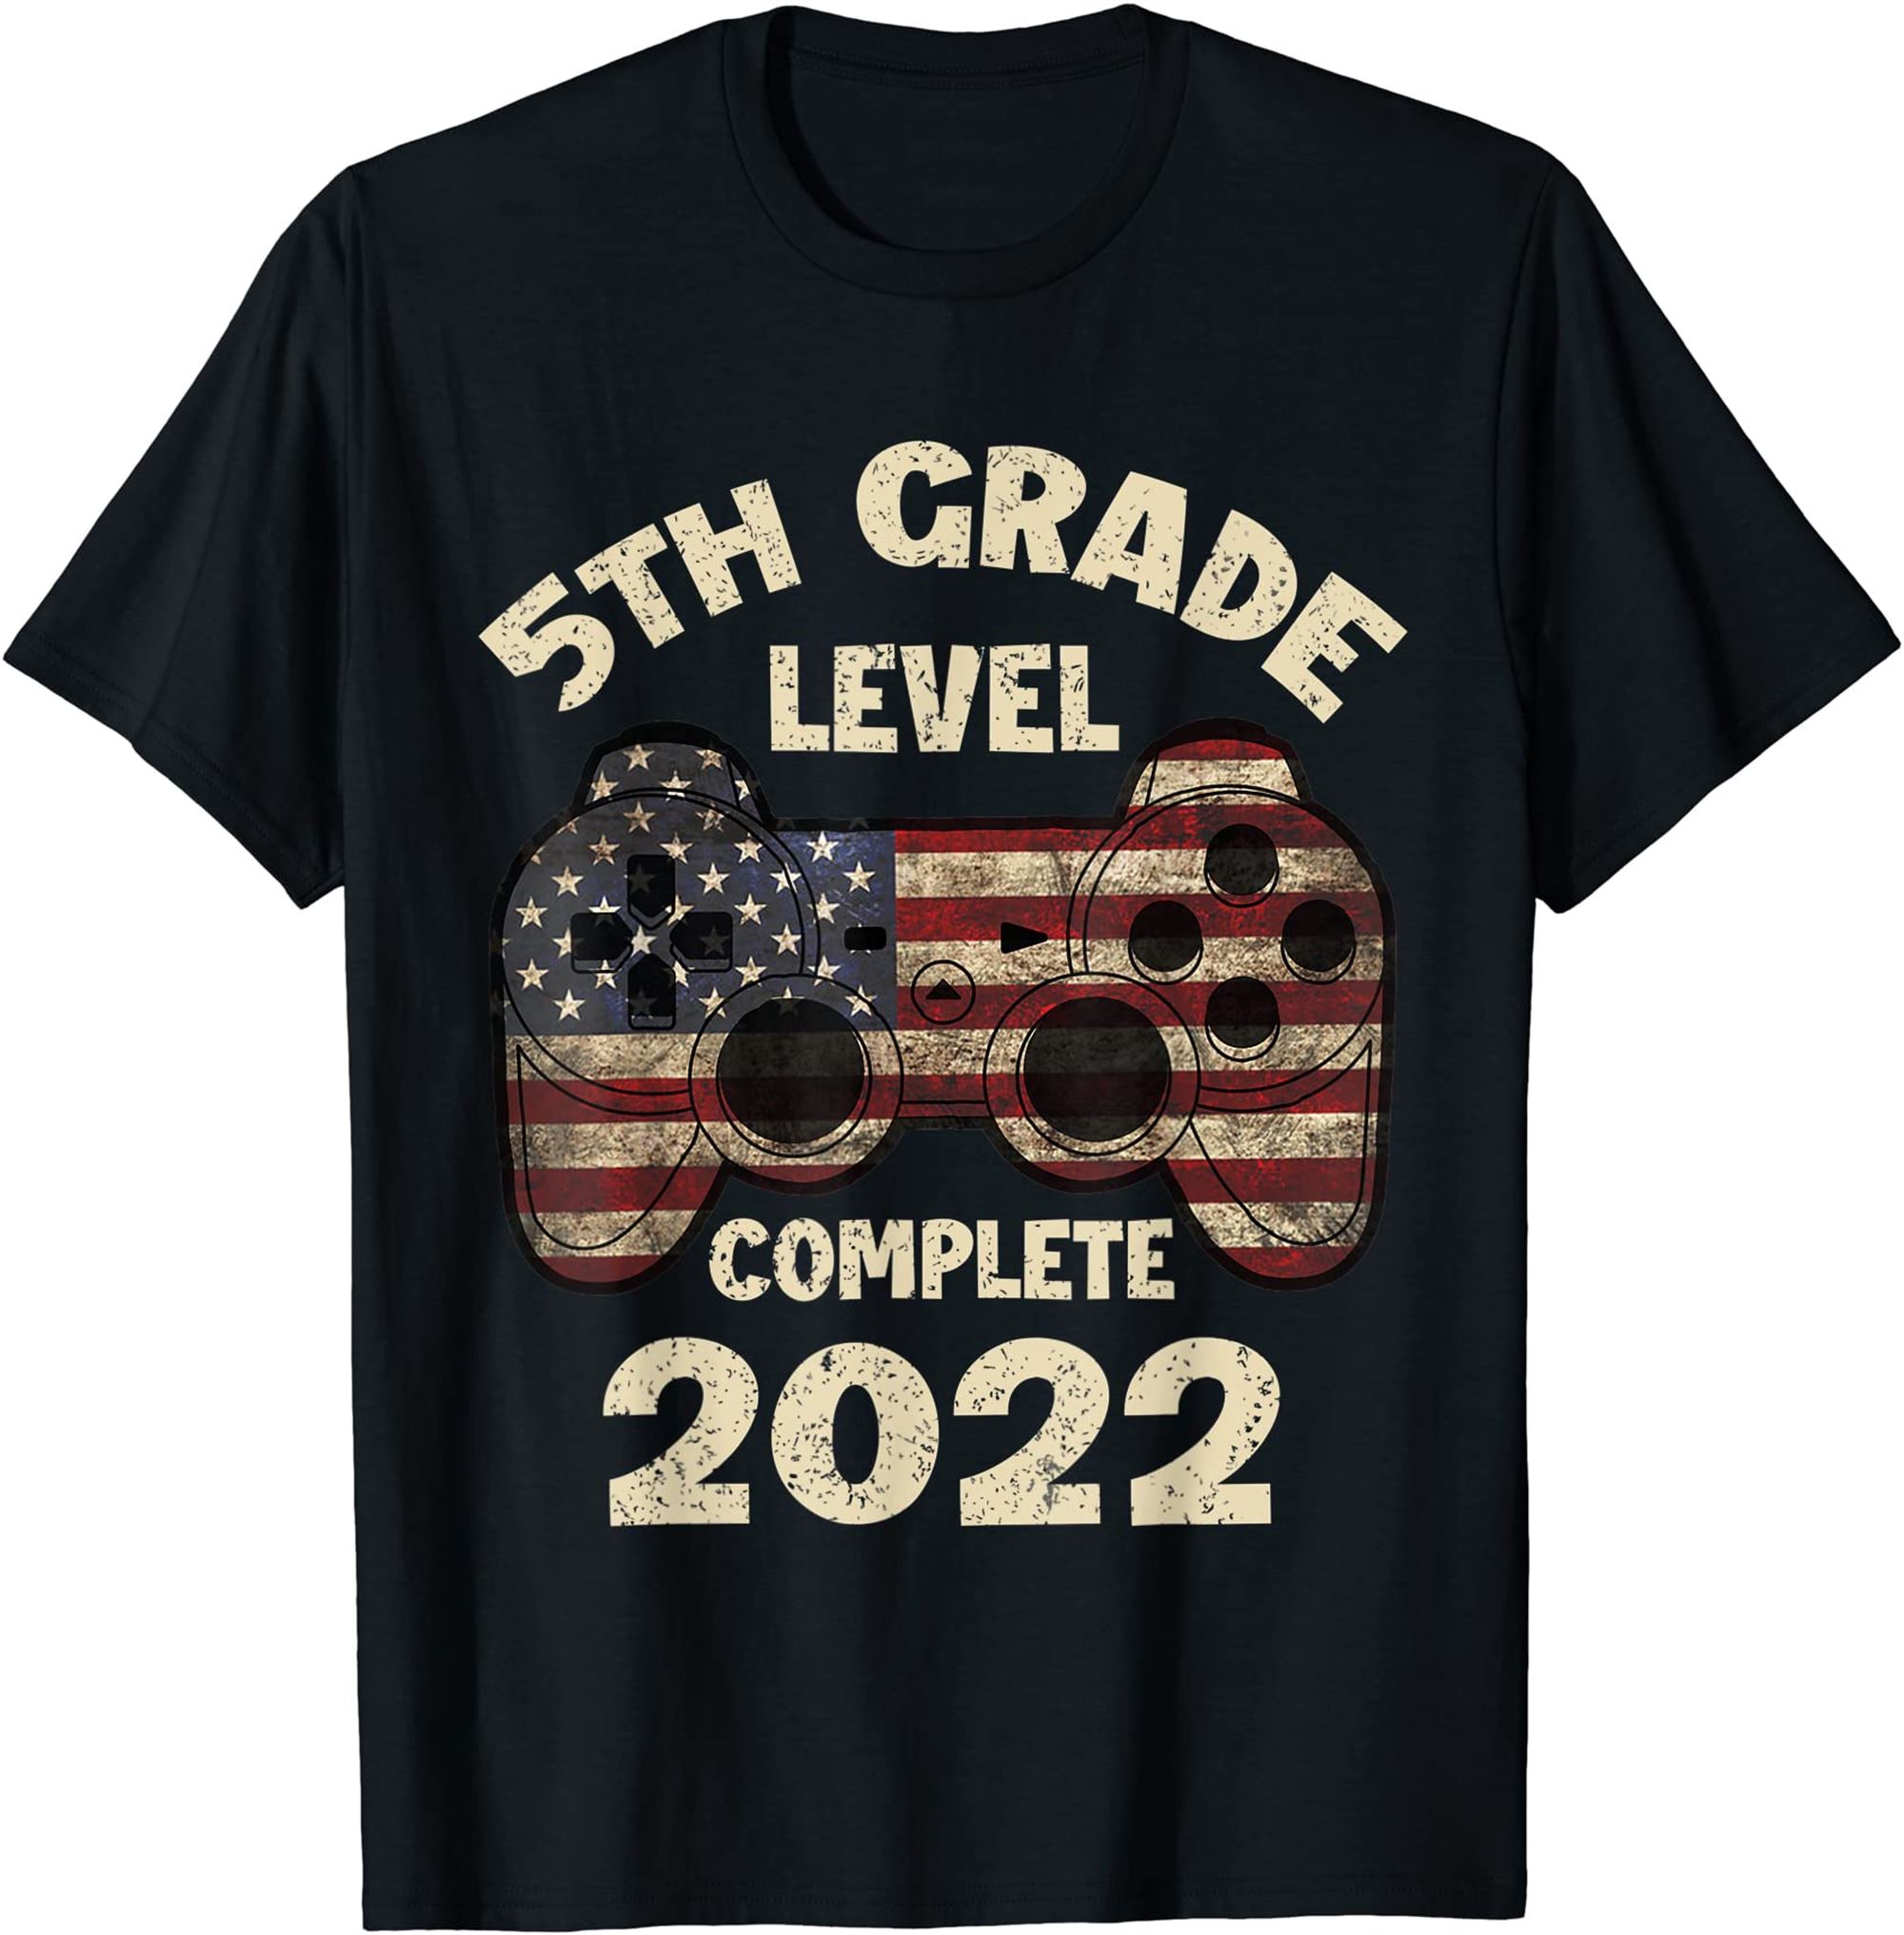 5th Grade Level Complete 2022 5th Grade School Graduation T-shirt Full Size Up To 5xl